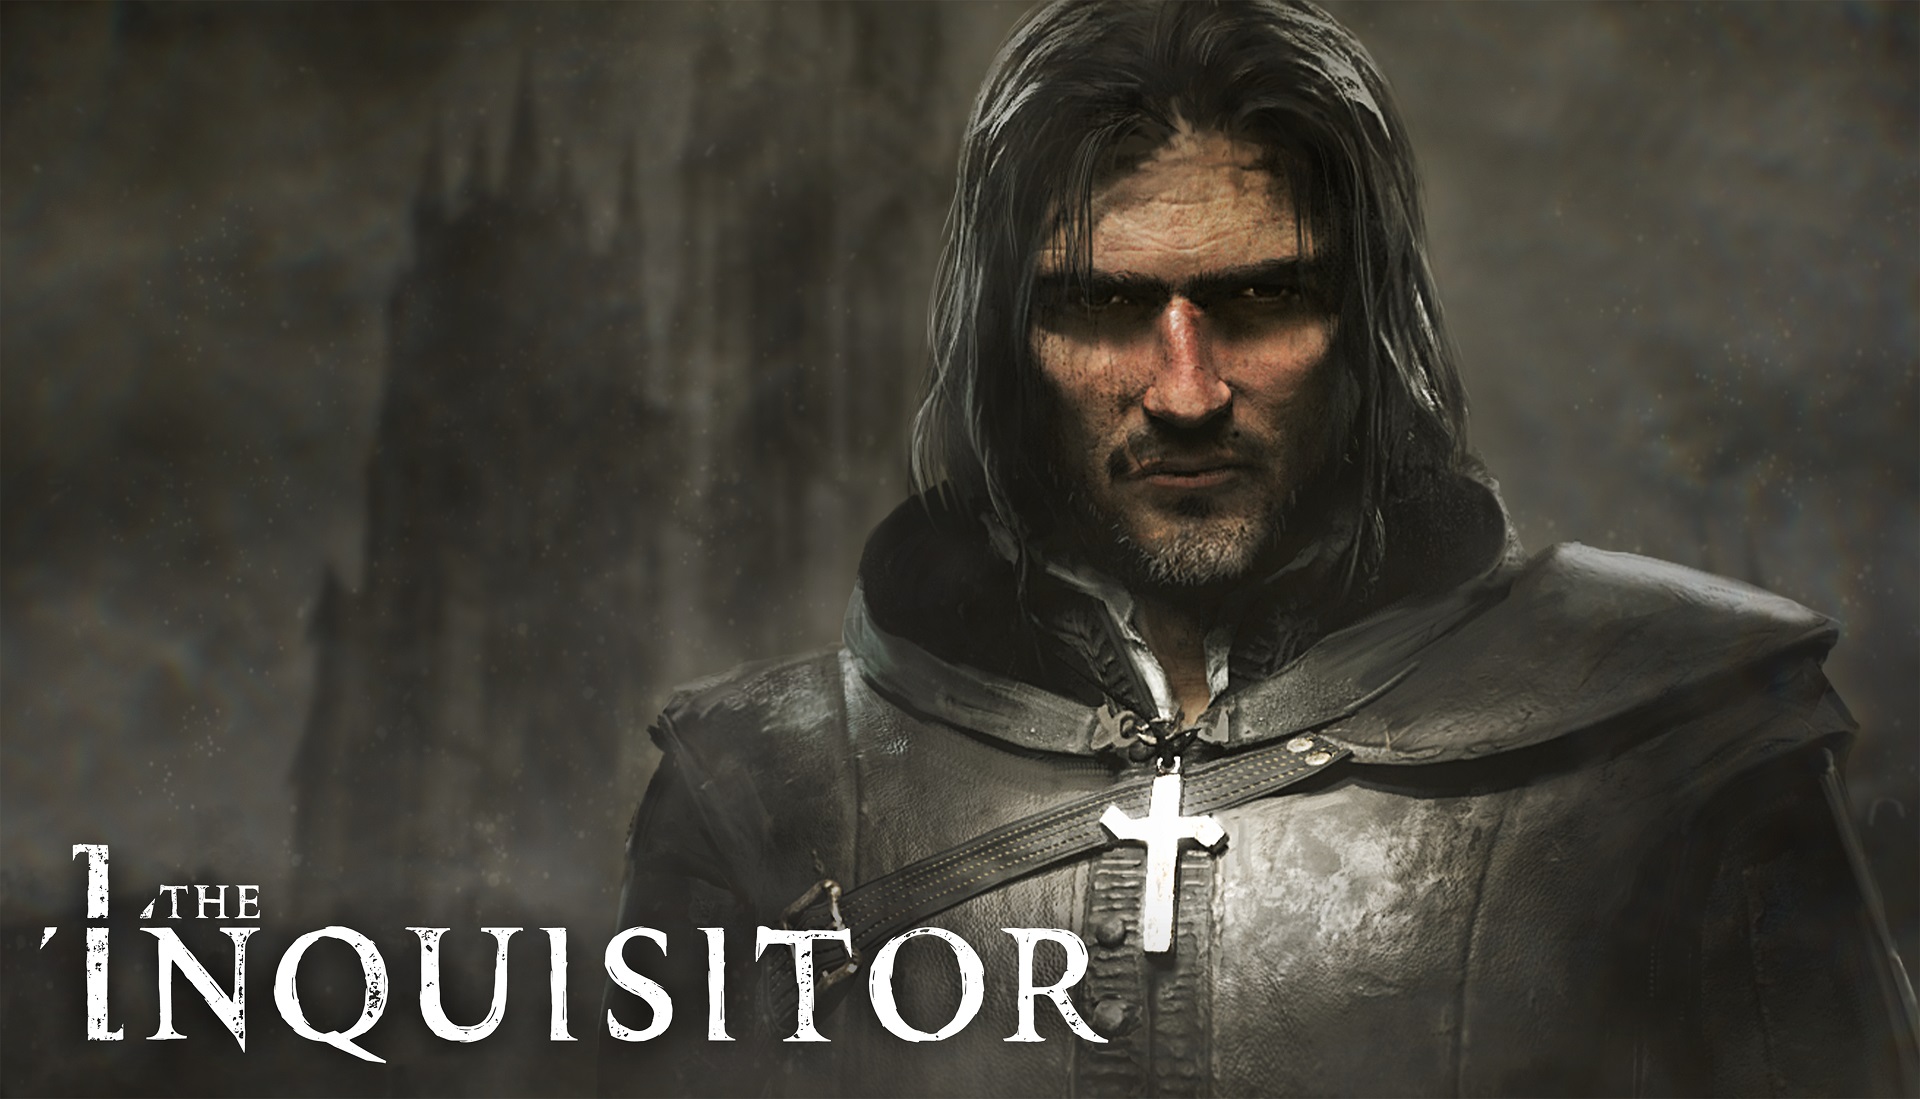 God Give Us Strength Not to Forgive Those Who Sin Against Us | “I, the Inquisitor” Gameplay Revealed.